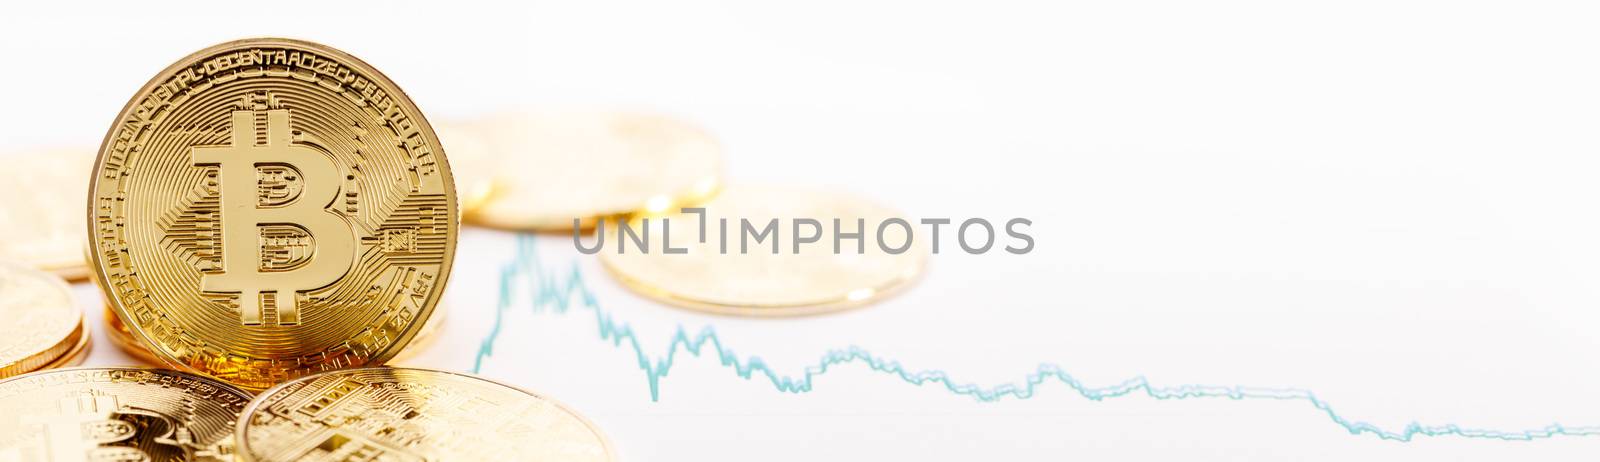 Gold coins with bitcoin sign and rate graph isolated on white background